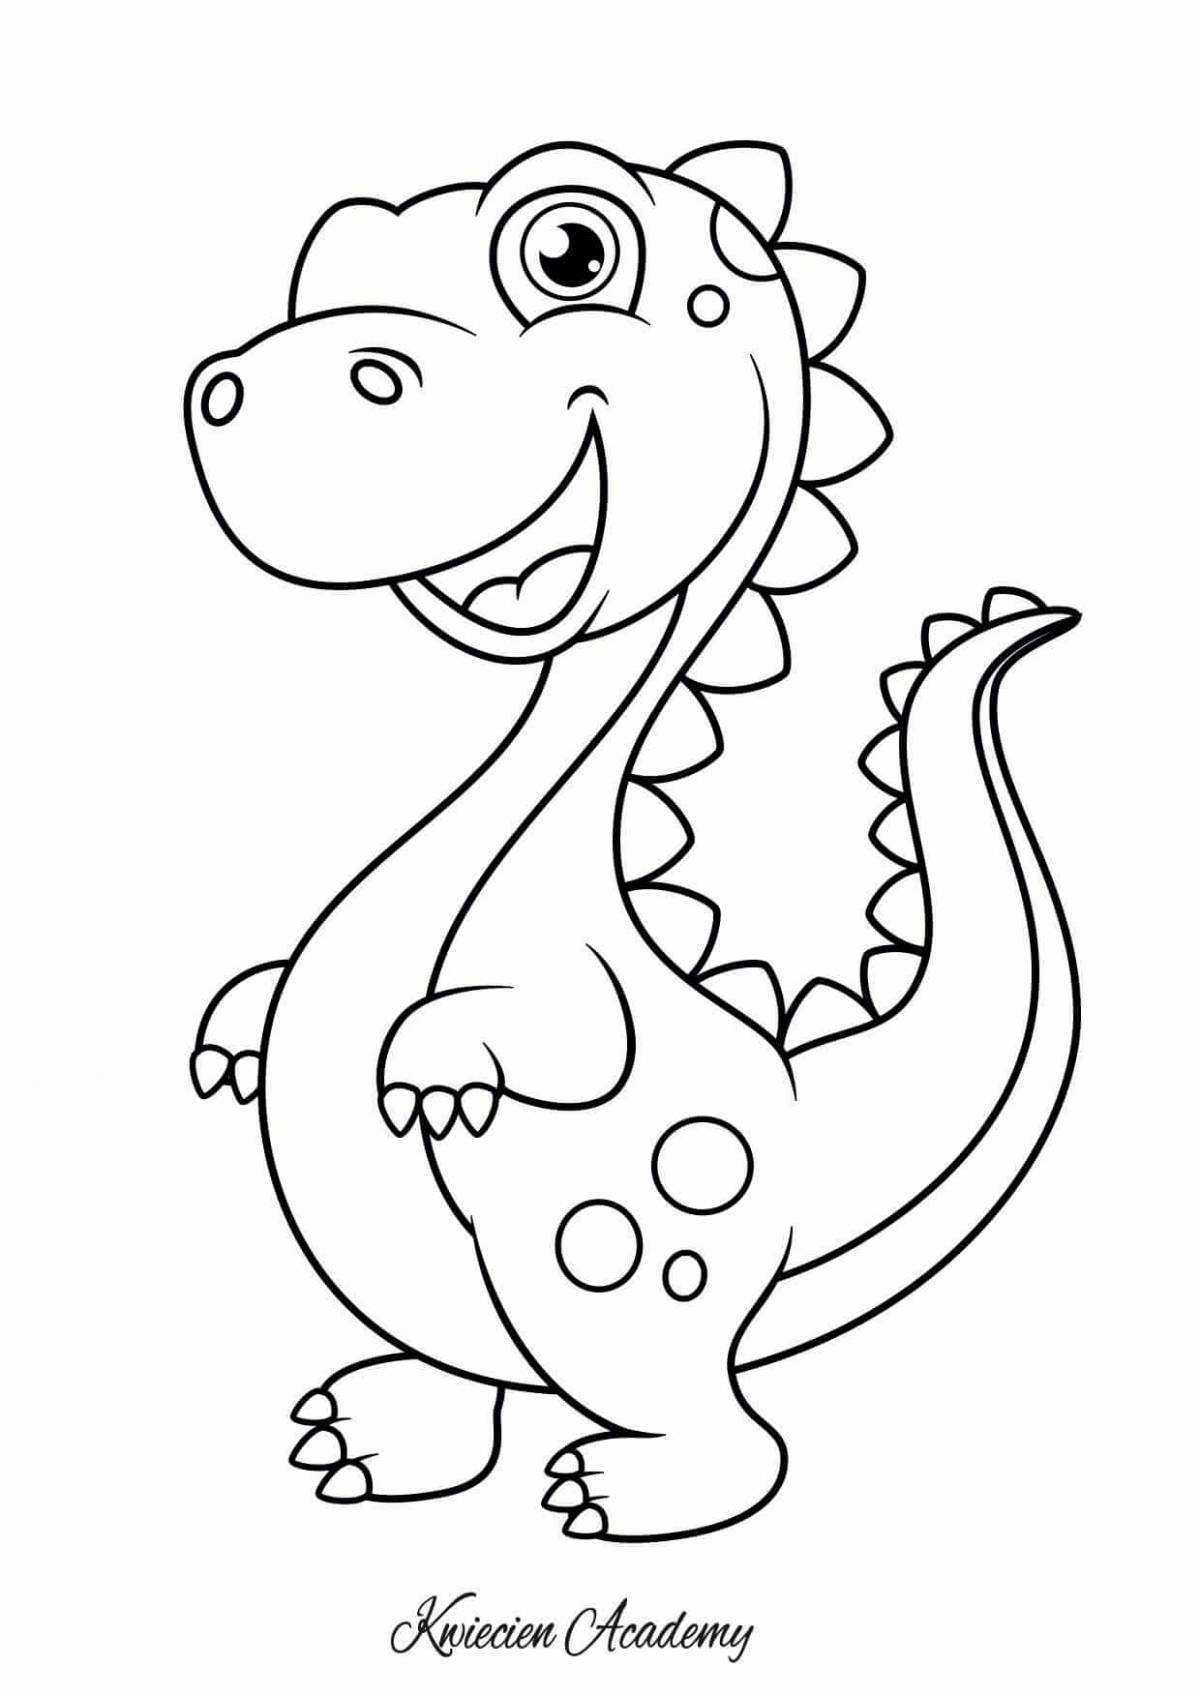 Dinosaur coloring book for 4-5 year olds